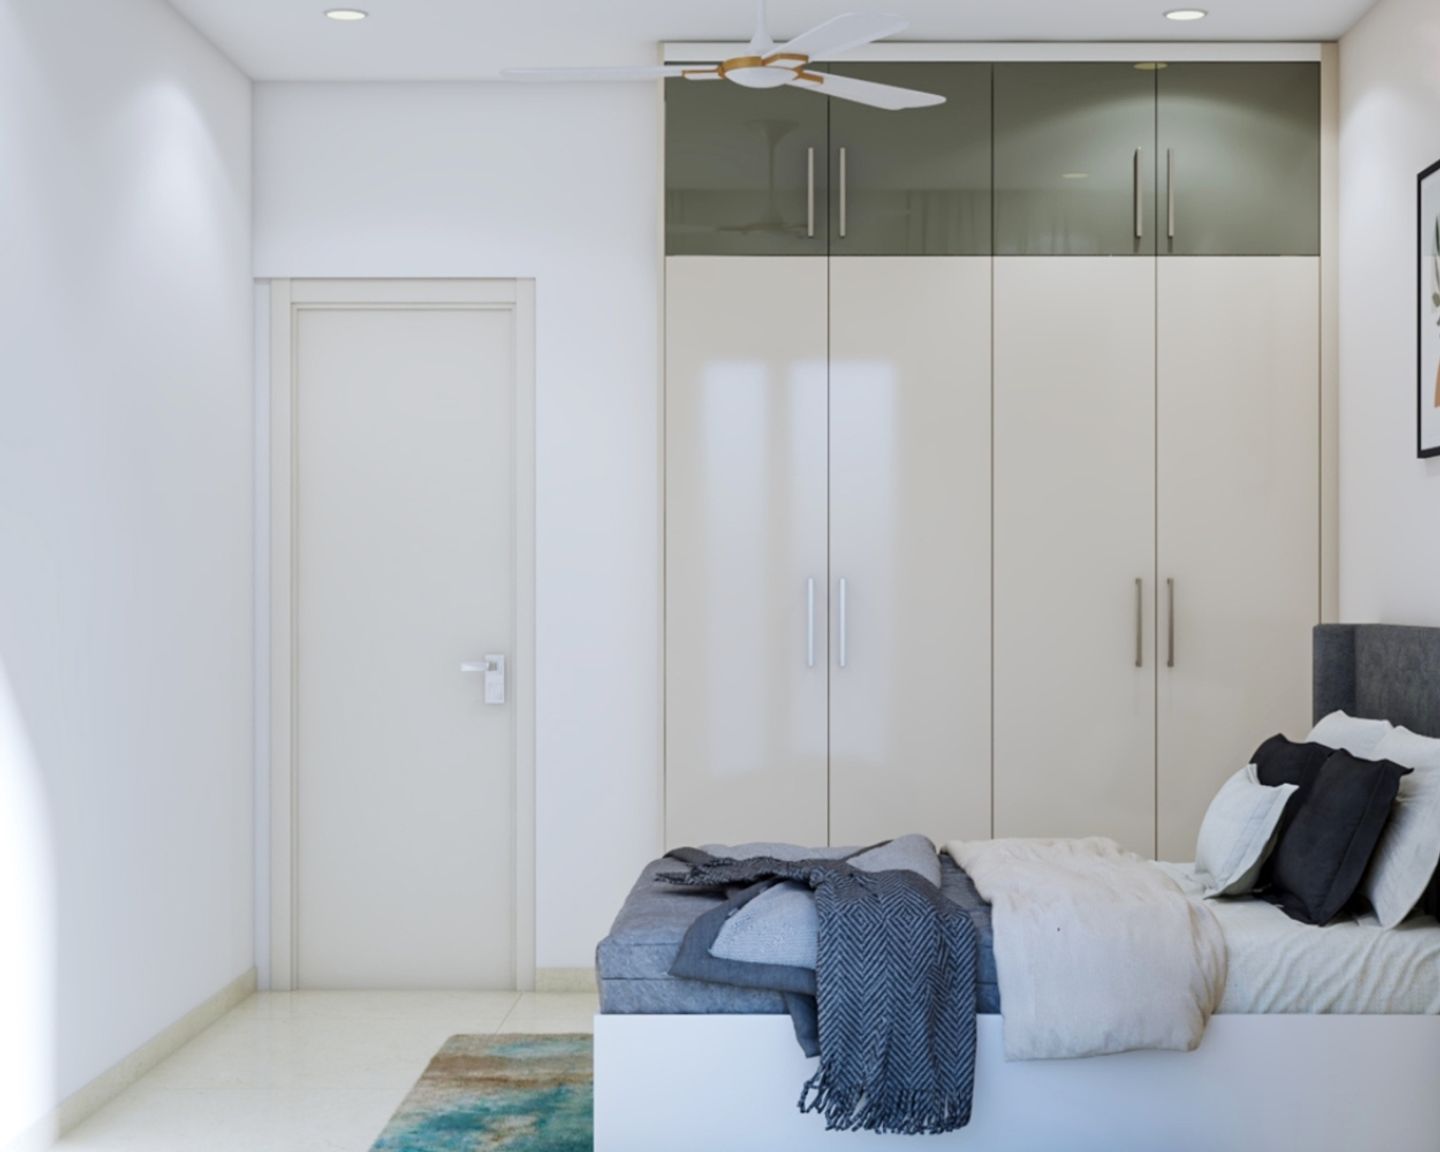 Modern Guest Room Design With A Double Bed And Recessed Lighting